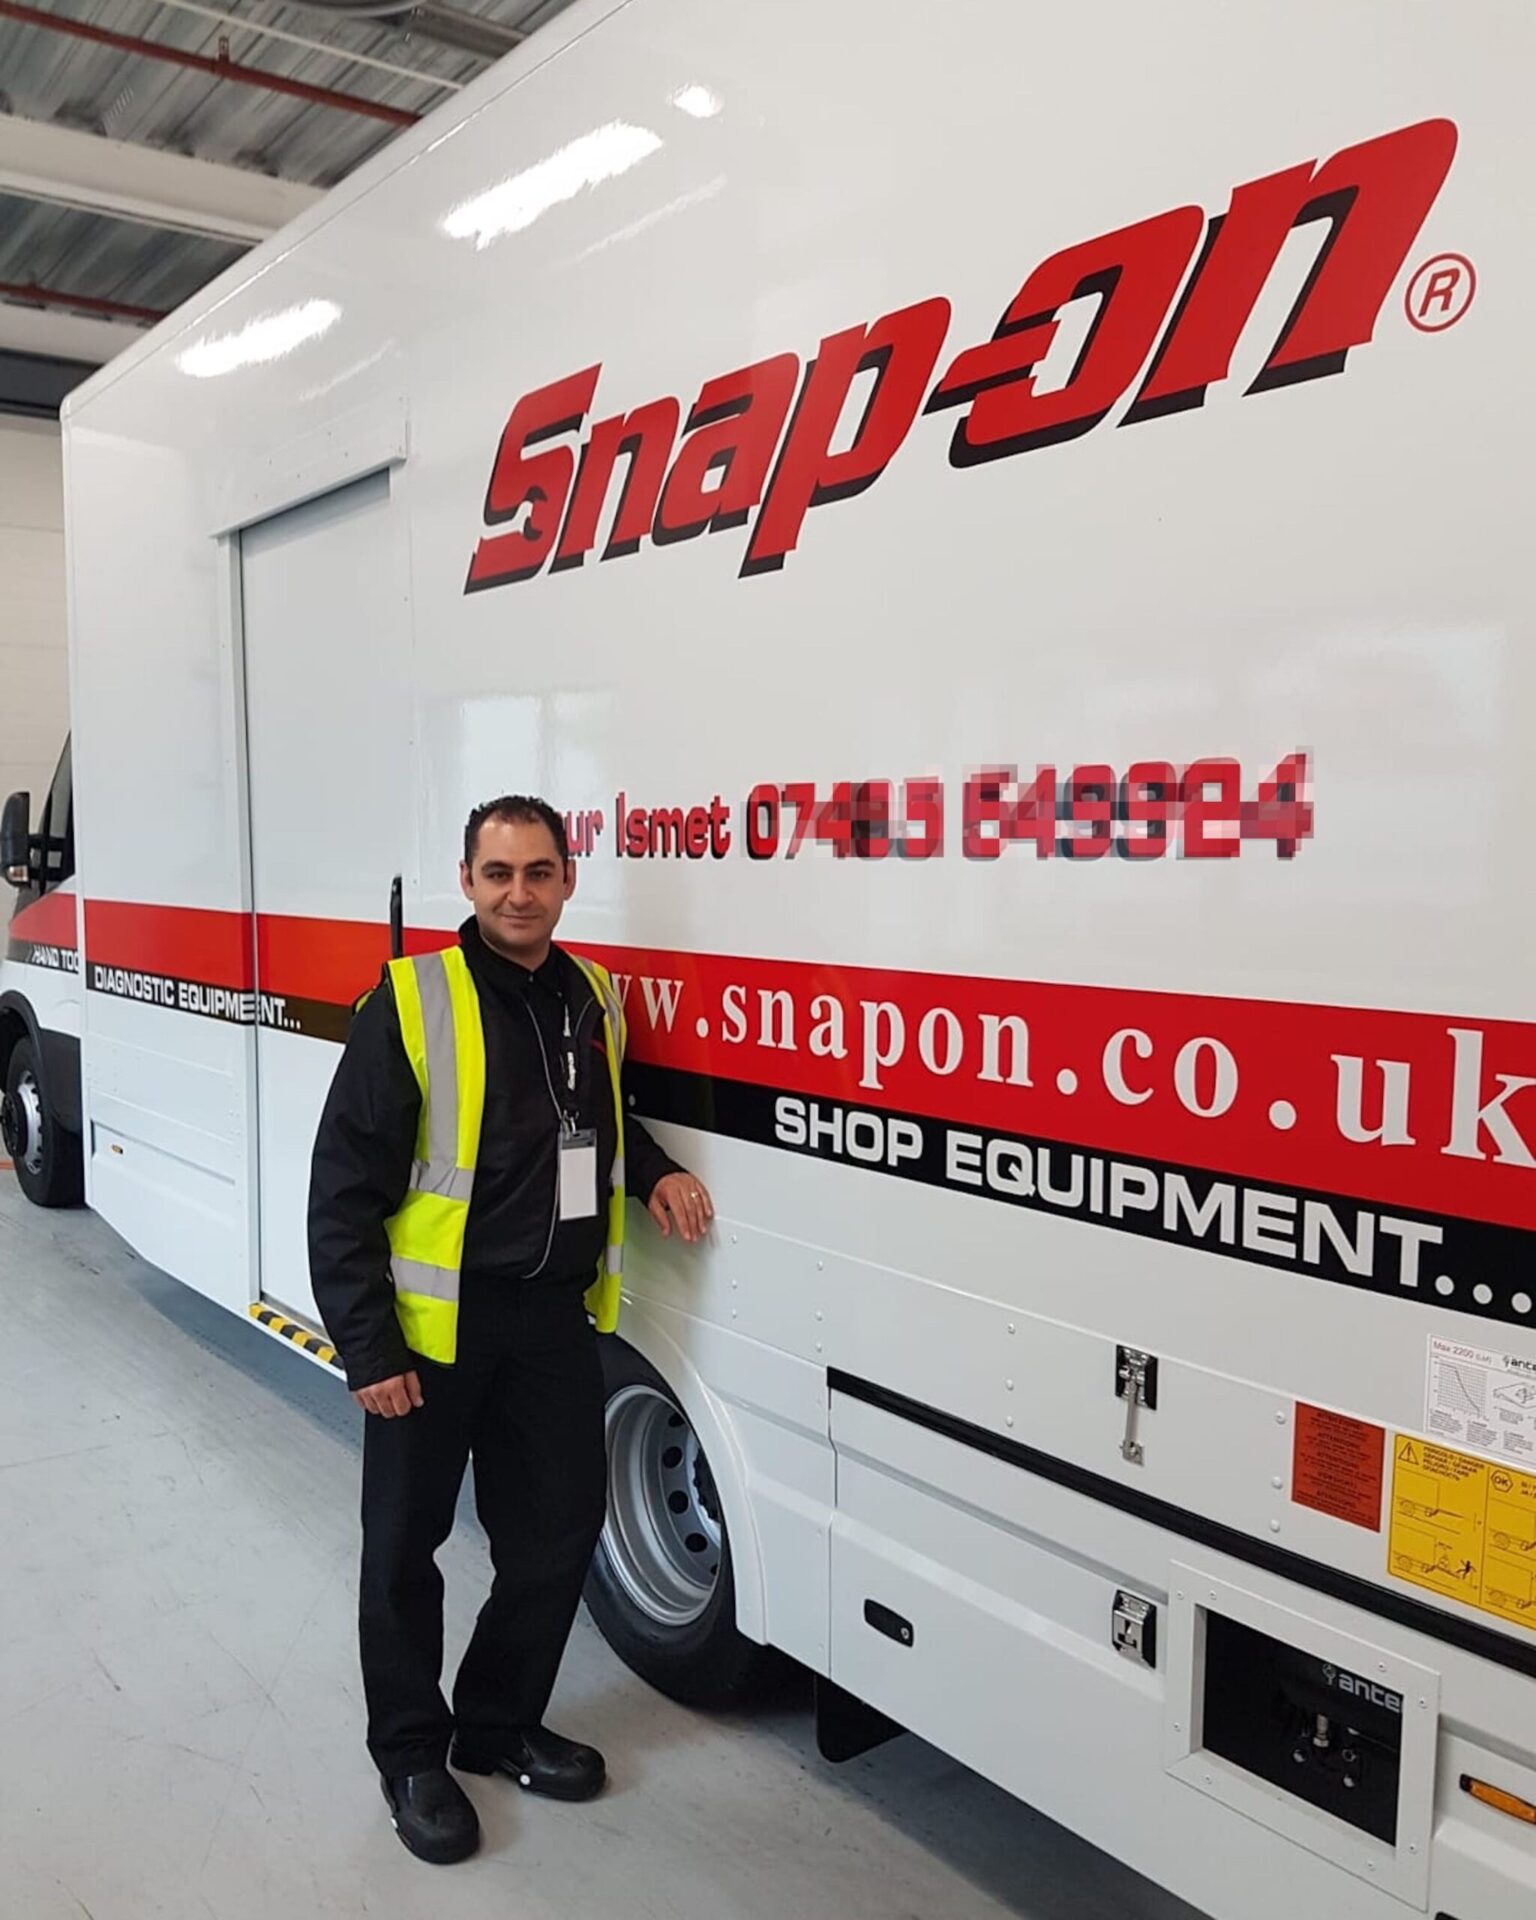 Nine New Reasons To Celebrate For Snap-on!